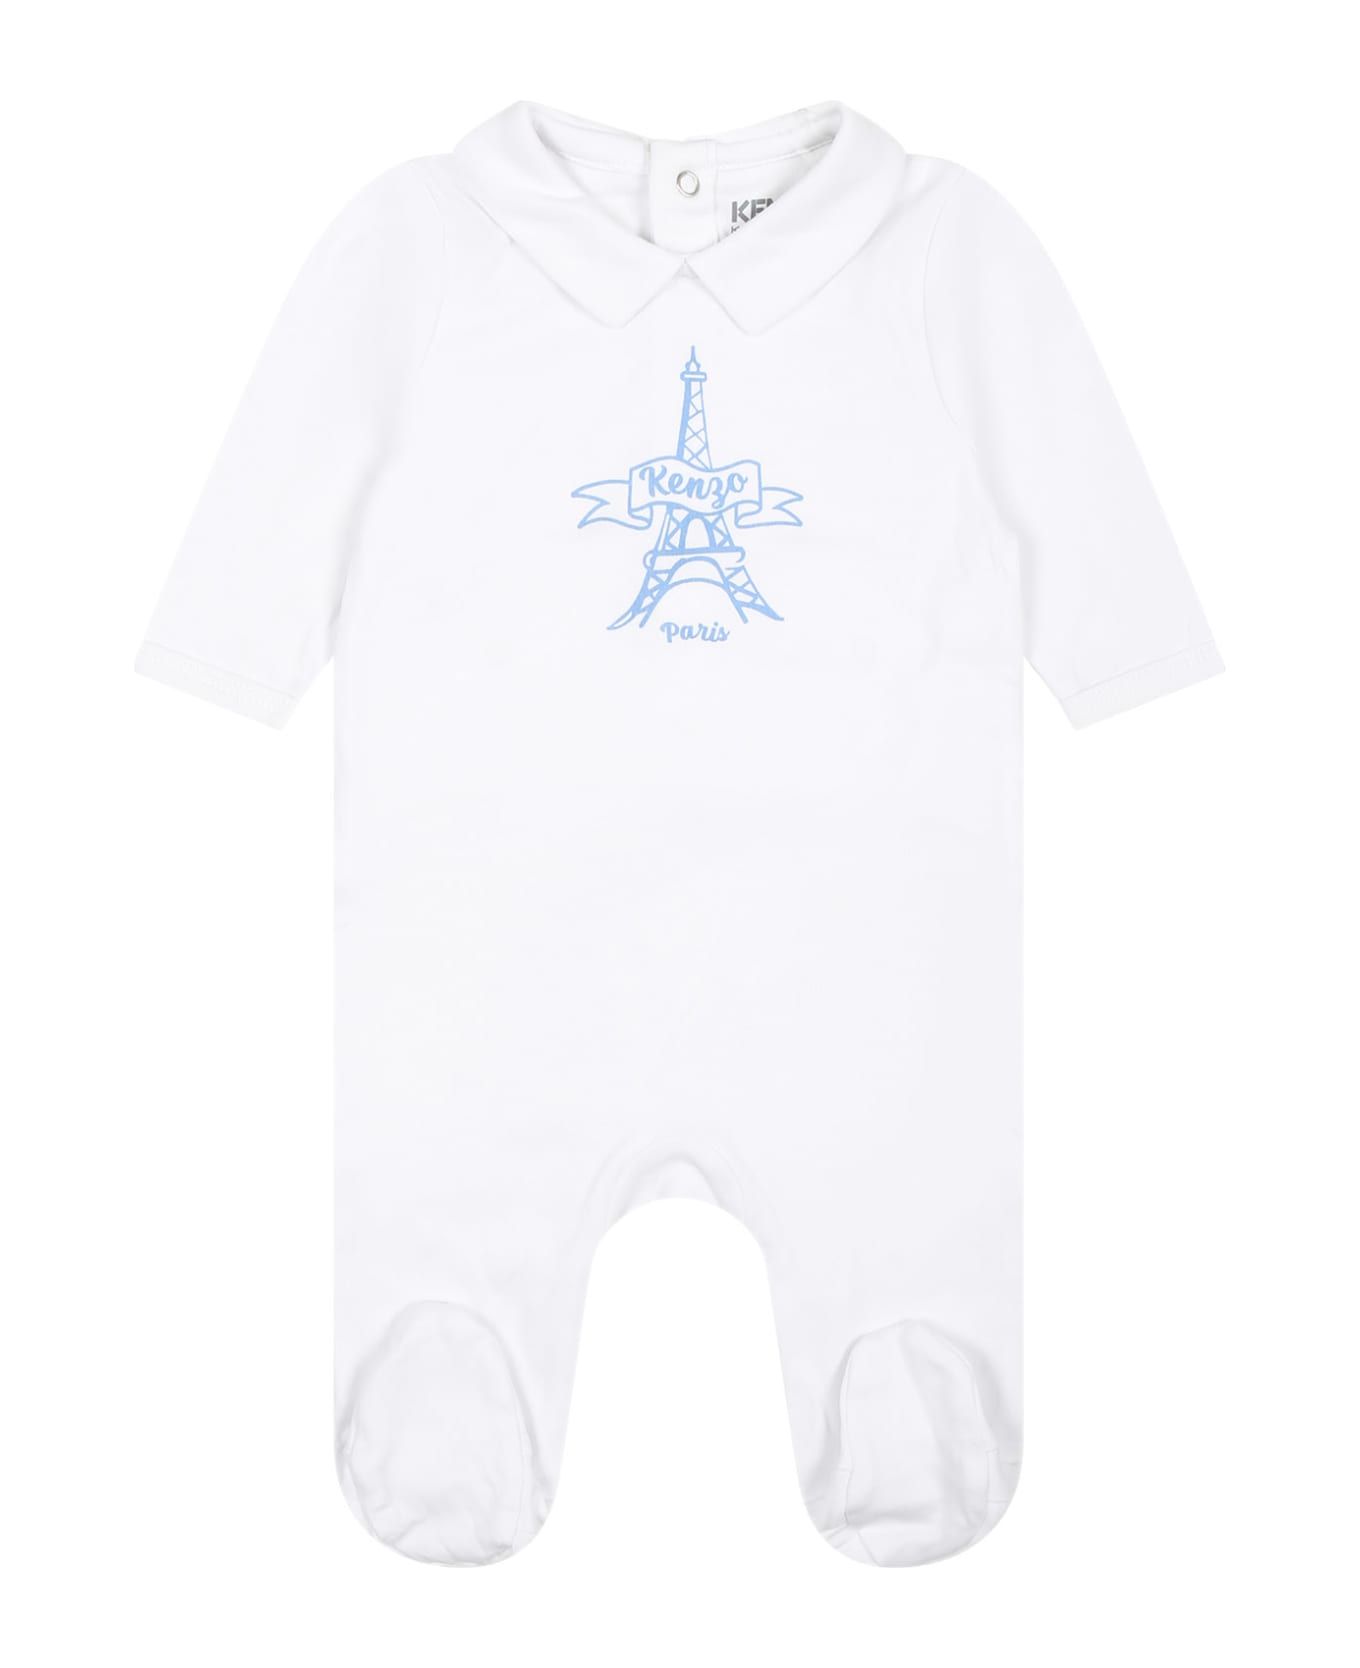 Kenzo Kids Light Blue Set For Baby Boy With Tour Eiffel And Print - Multicolor